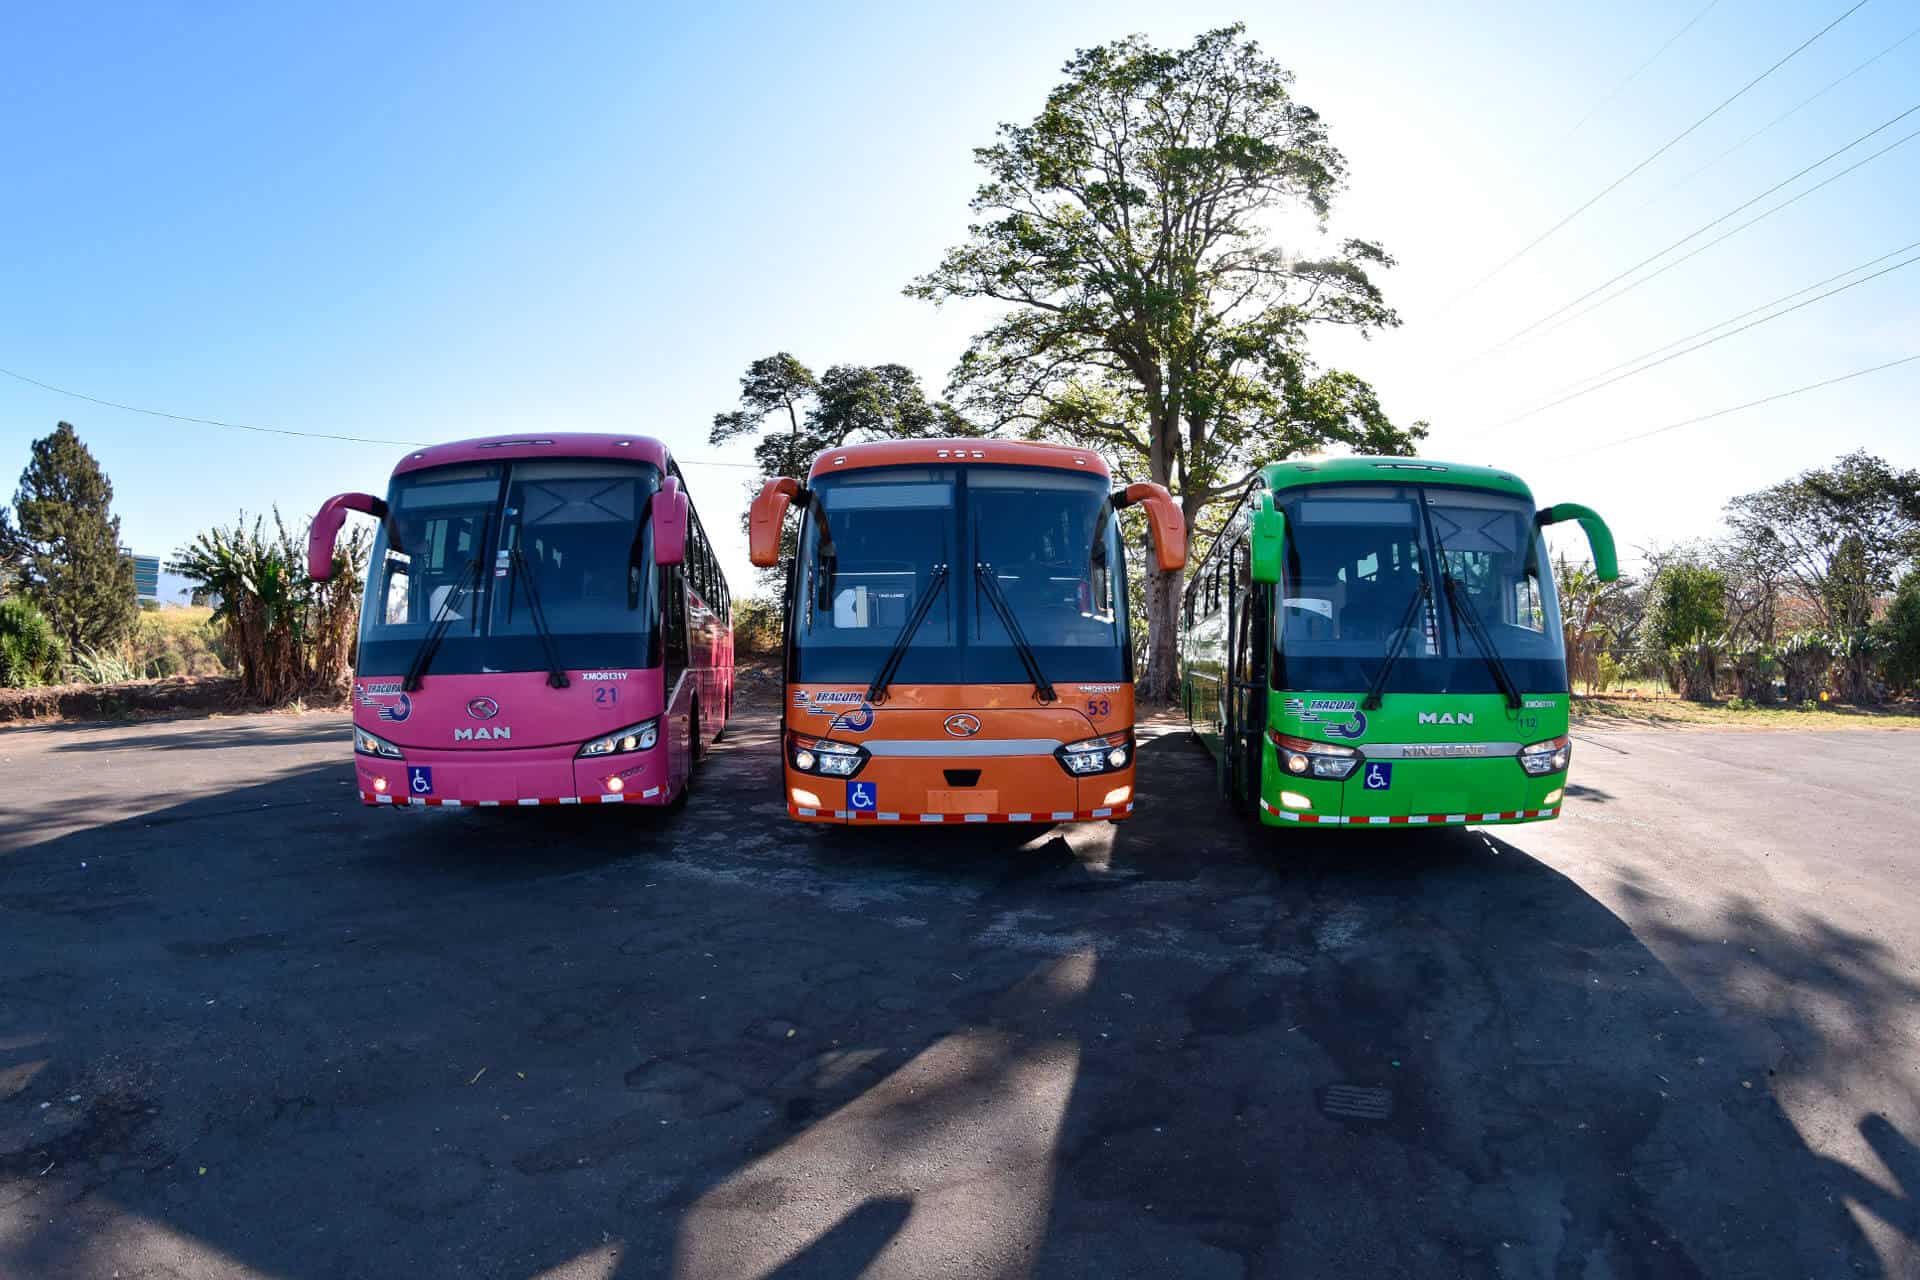 How To Get From Uvita to Sierpe Best Way – All Possible Ways, Uvita to Sierpe, Uvita to Sierpe transfer, cheapest way from Uvita to Sierpe, bus from Uvita to Sierpe, from Uvita to Sierpe by bus, best way from Uvita to Sierpe, taxi from Uvita to Sierpe, private transfer from Uvita to Sierpe, Shared Van from Uvita to Sierpe, rent a car in Uvita, uber from Uvita to Sierpe